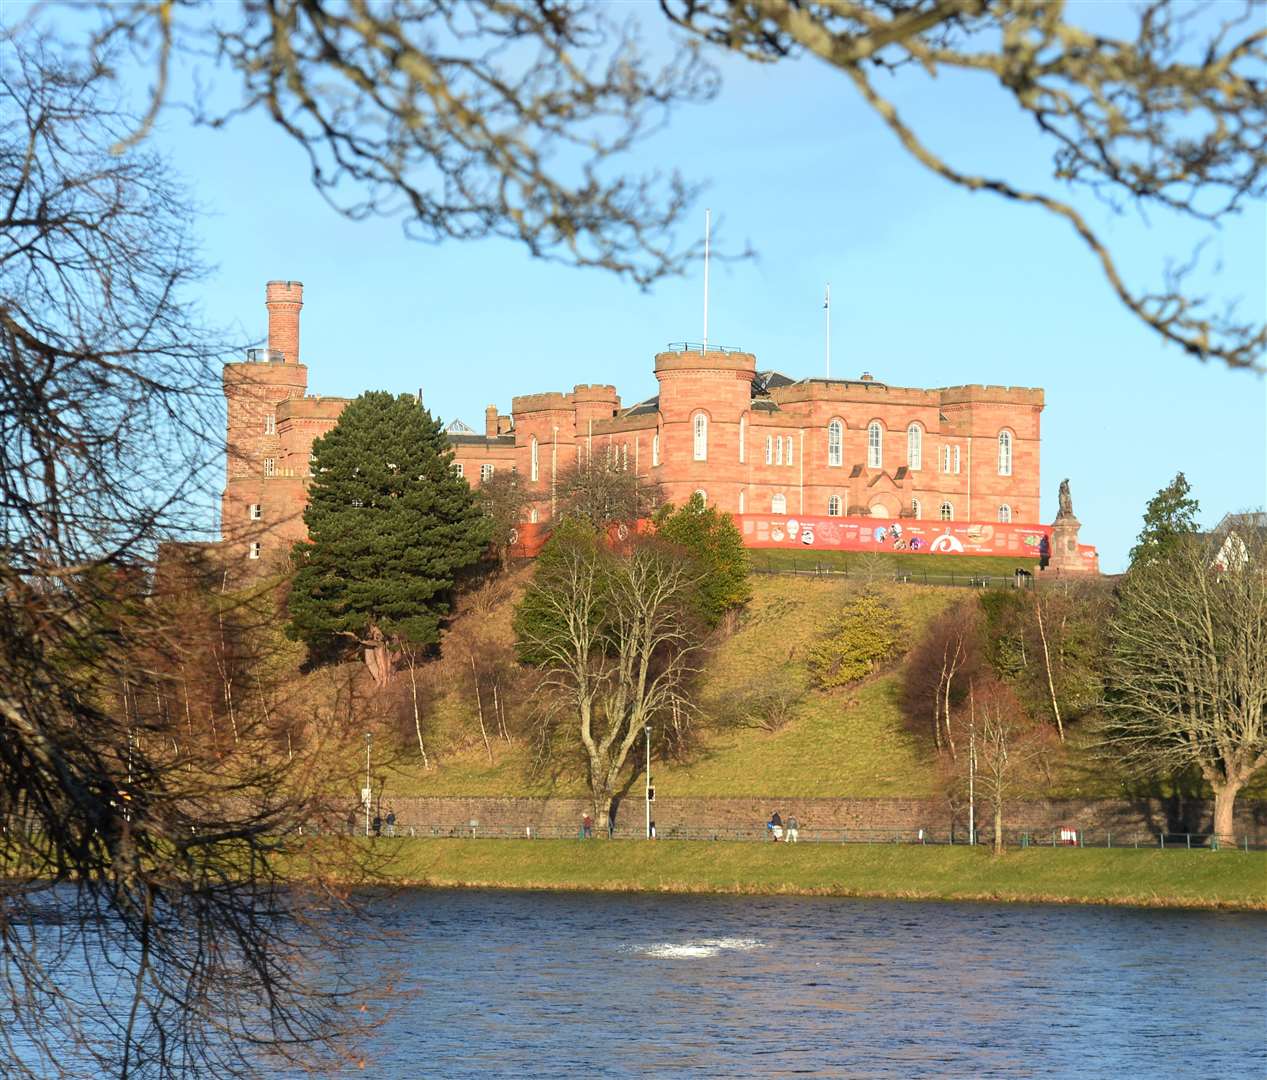 Forestry officers say the plans for the transformation of Inverness Castle do not protect trees on the site.